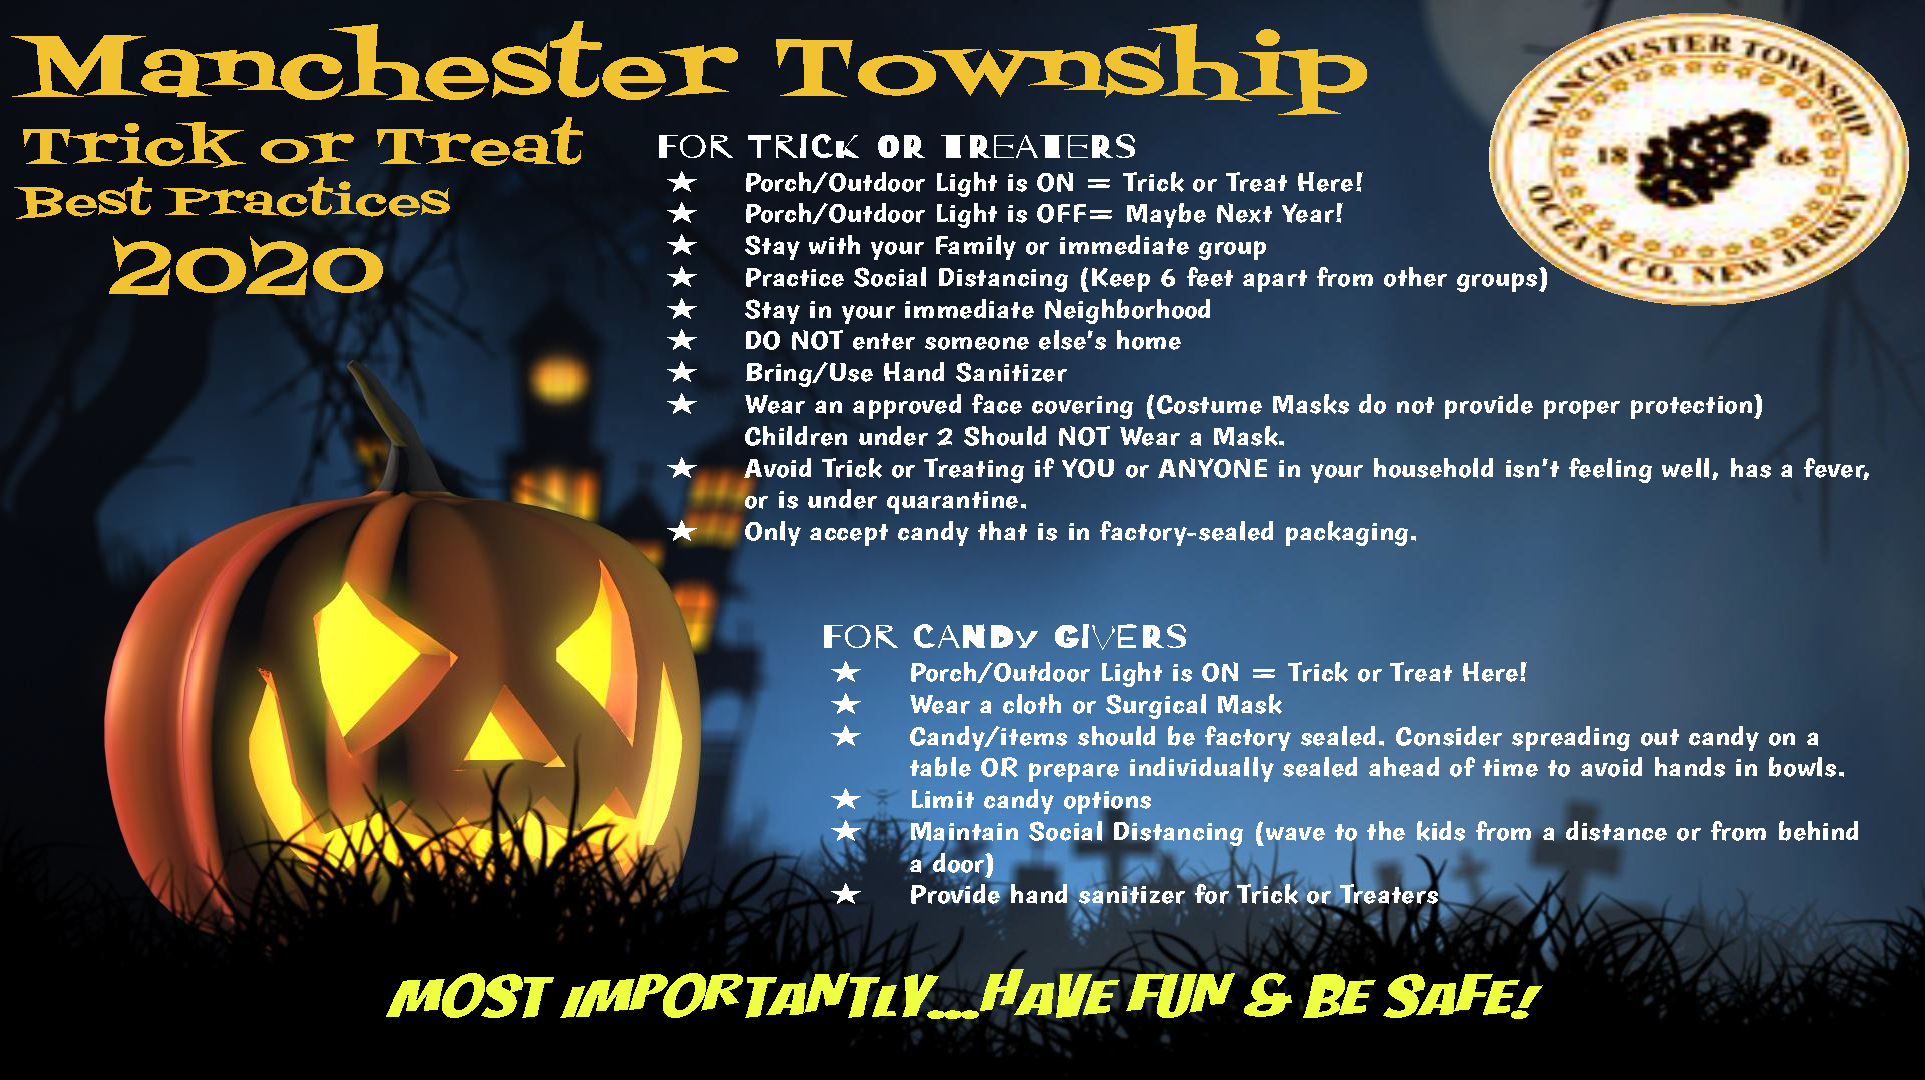 Trick or Treat Oct. 31, 2020 Manchester Township